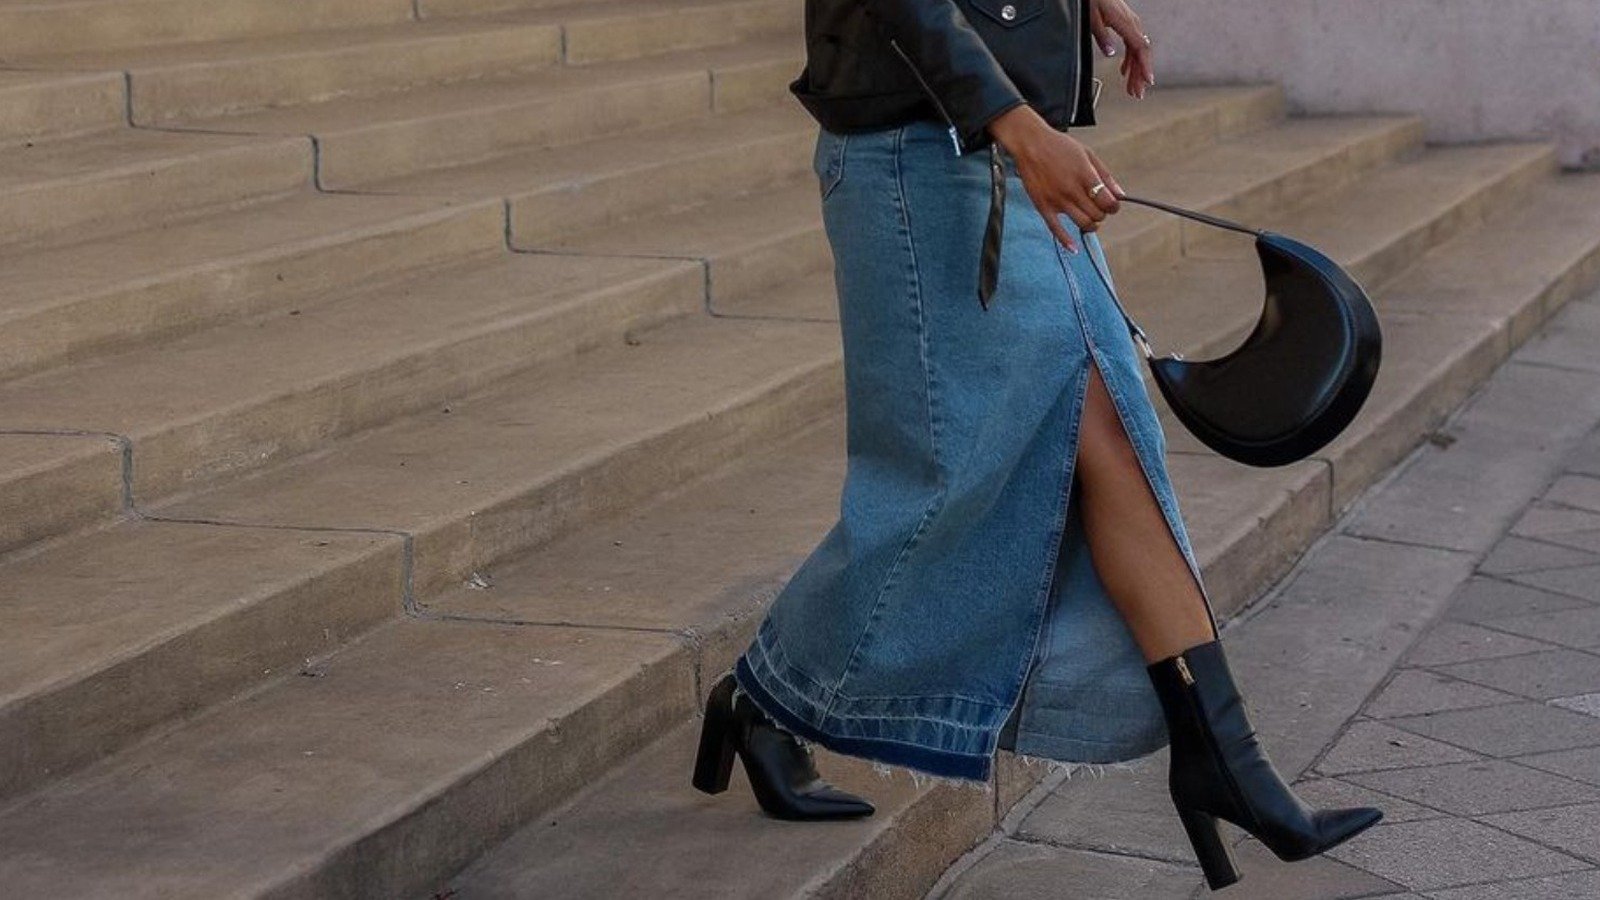 The Outdated Style To Avoid When Reaching For A Maxi Skirt This Season - Glam